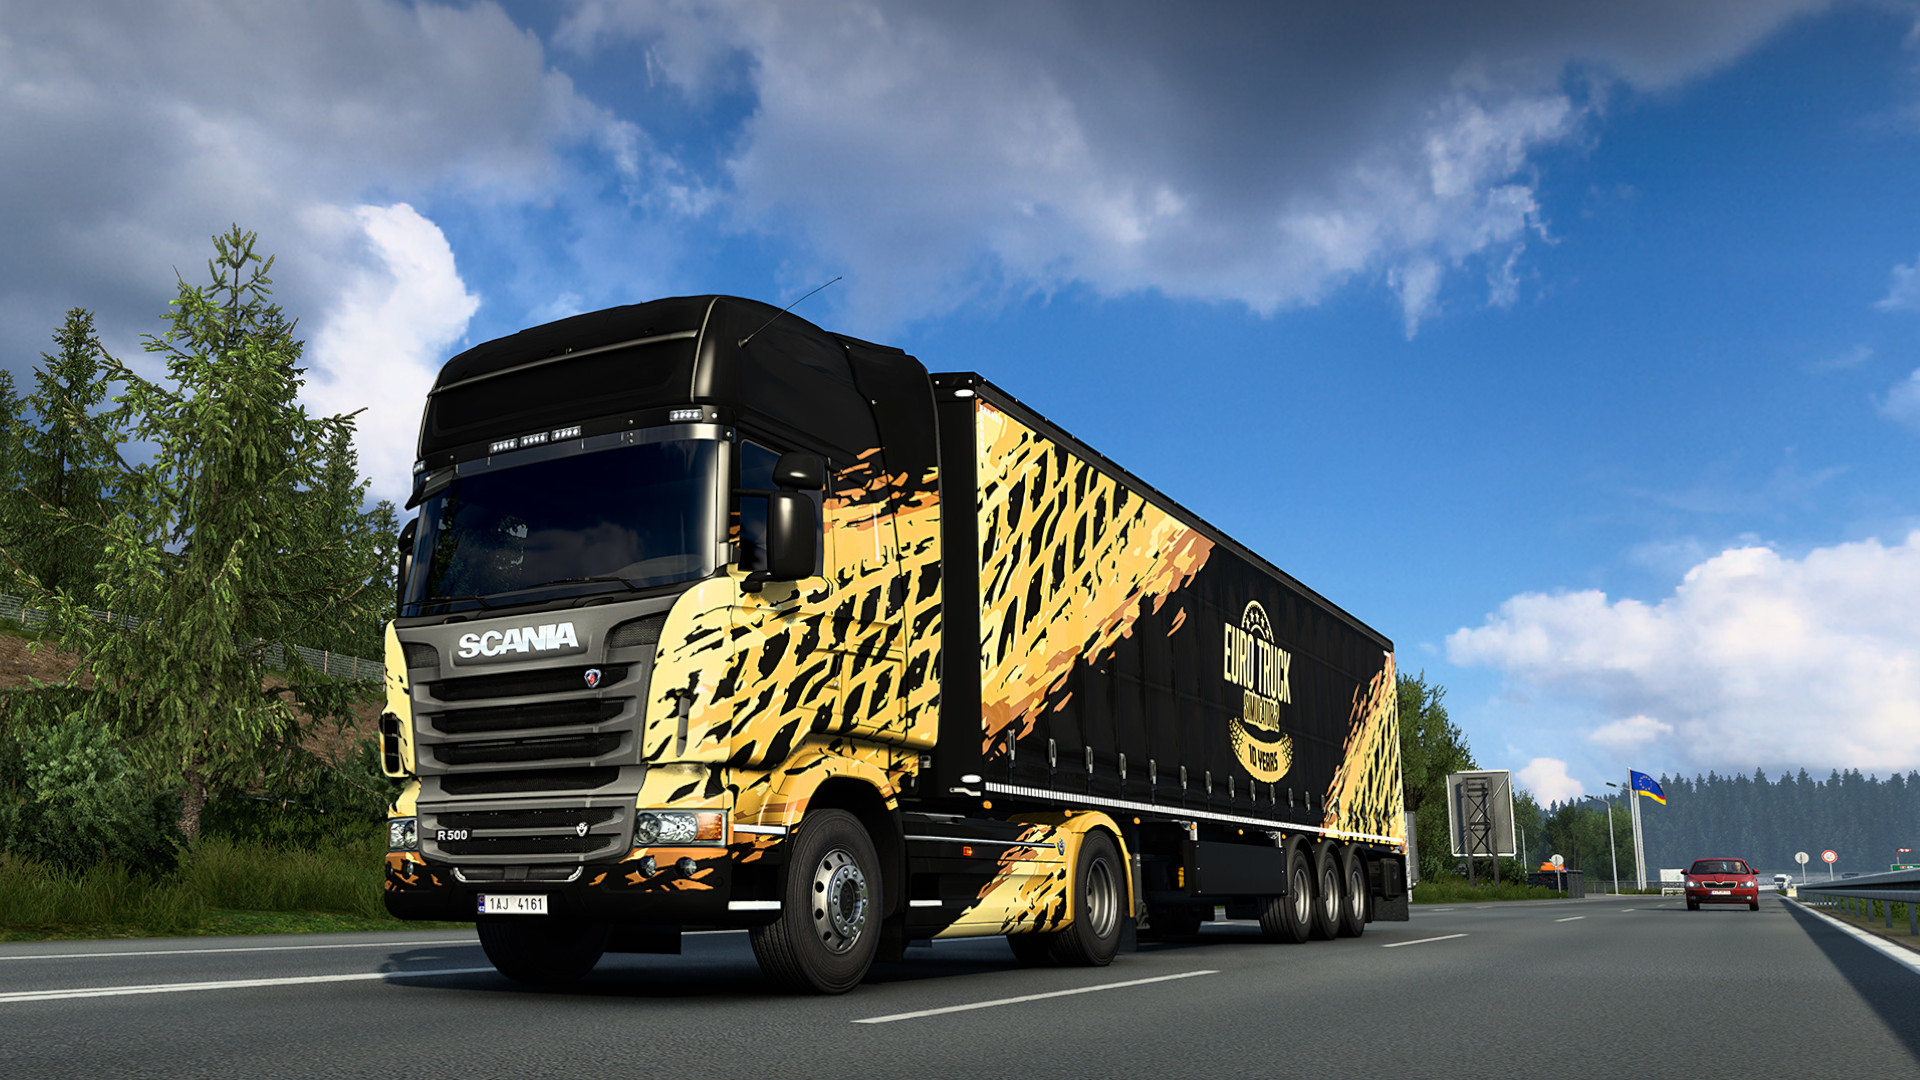 Euro Truck Simulator 2 Will Get a Large Patch